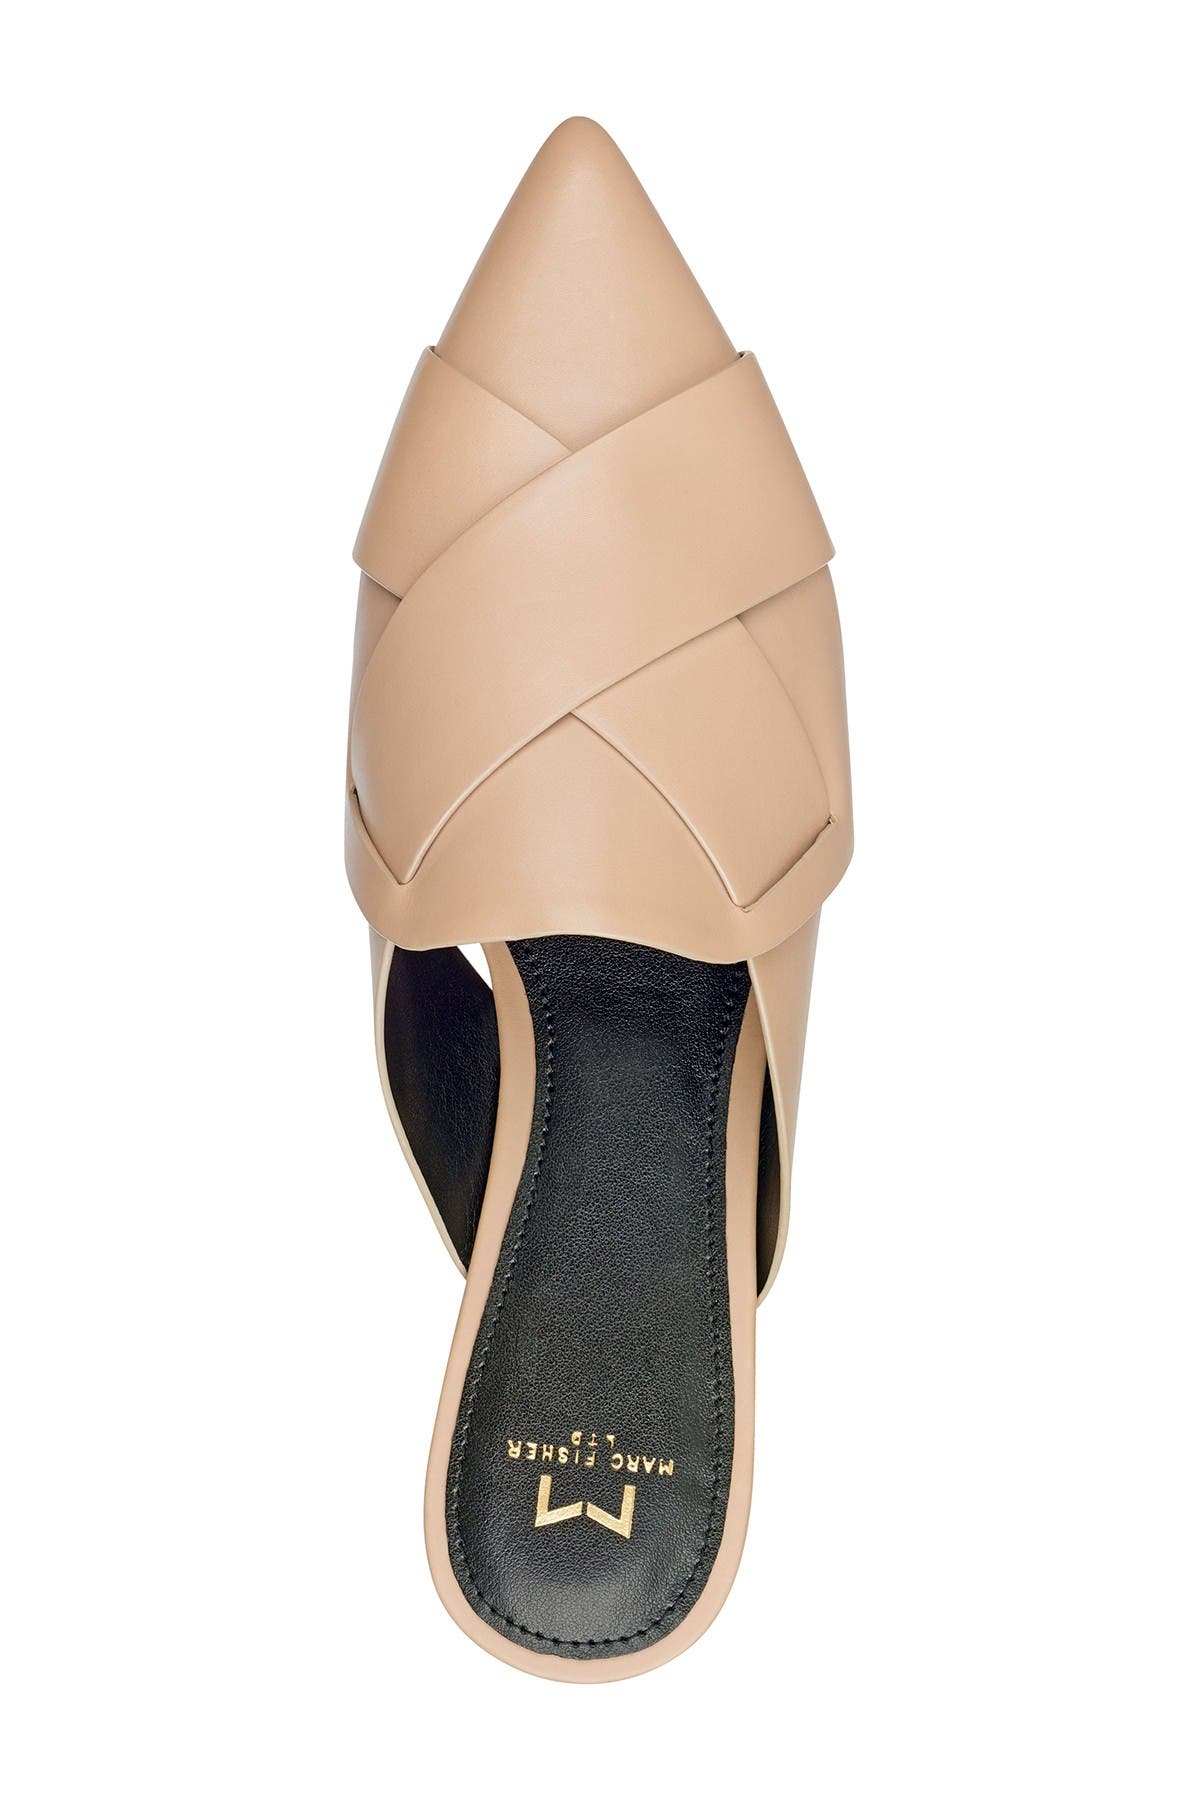 marc fisher sono pointy toe mule